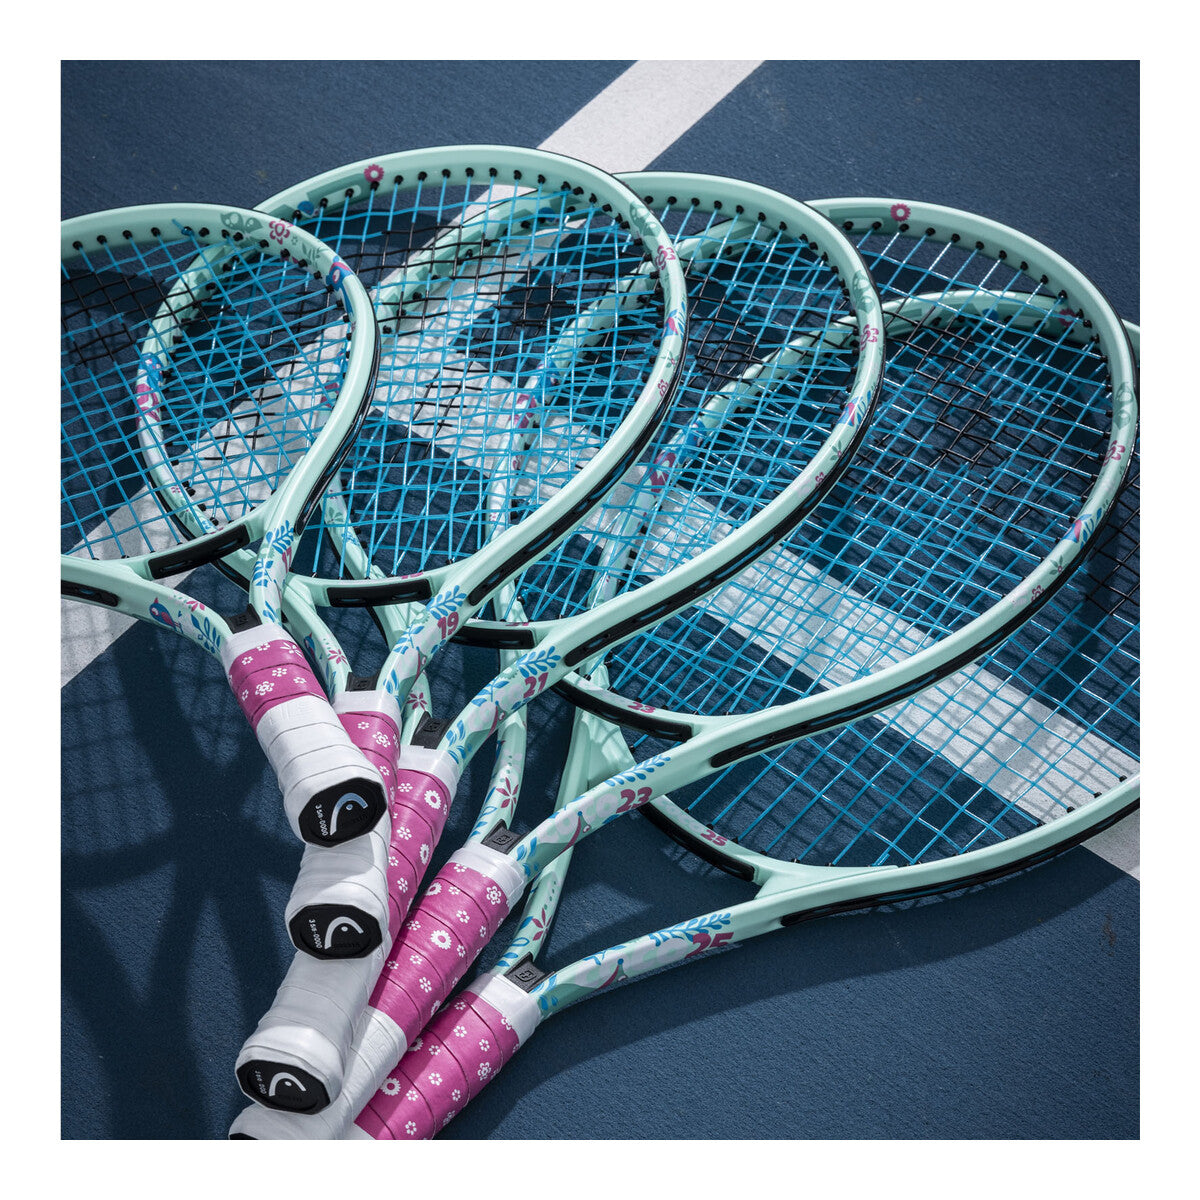 Head Coco 23 Junior Tennis Racket which is available for sale at GSM Sports